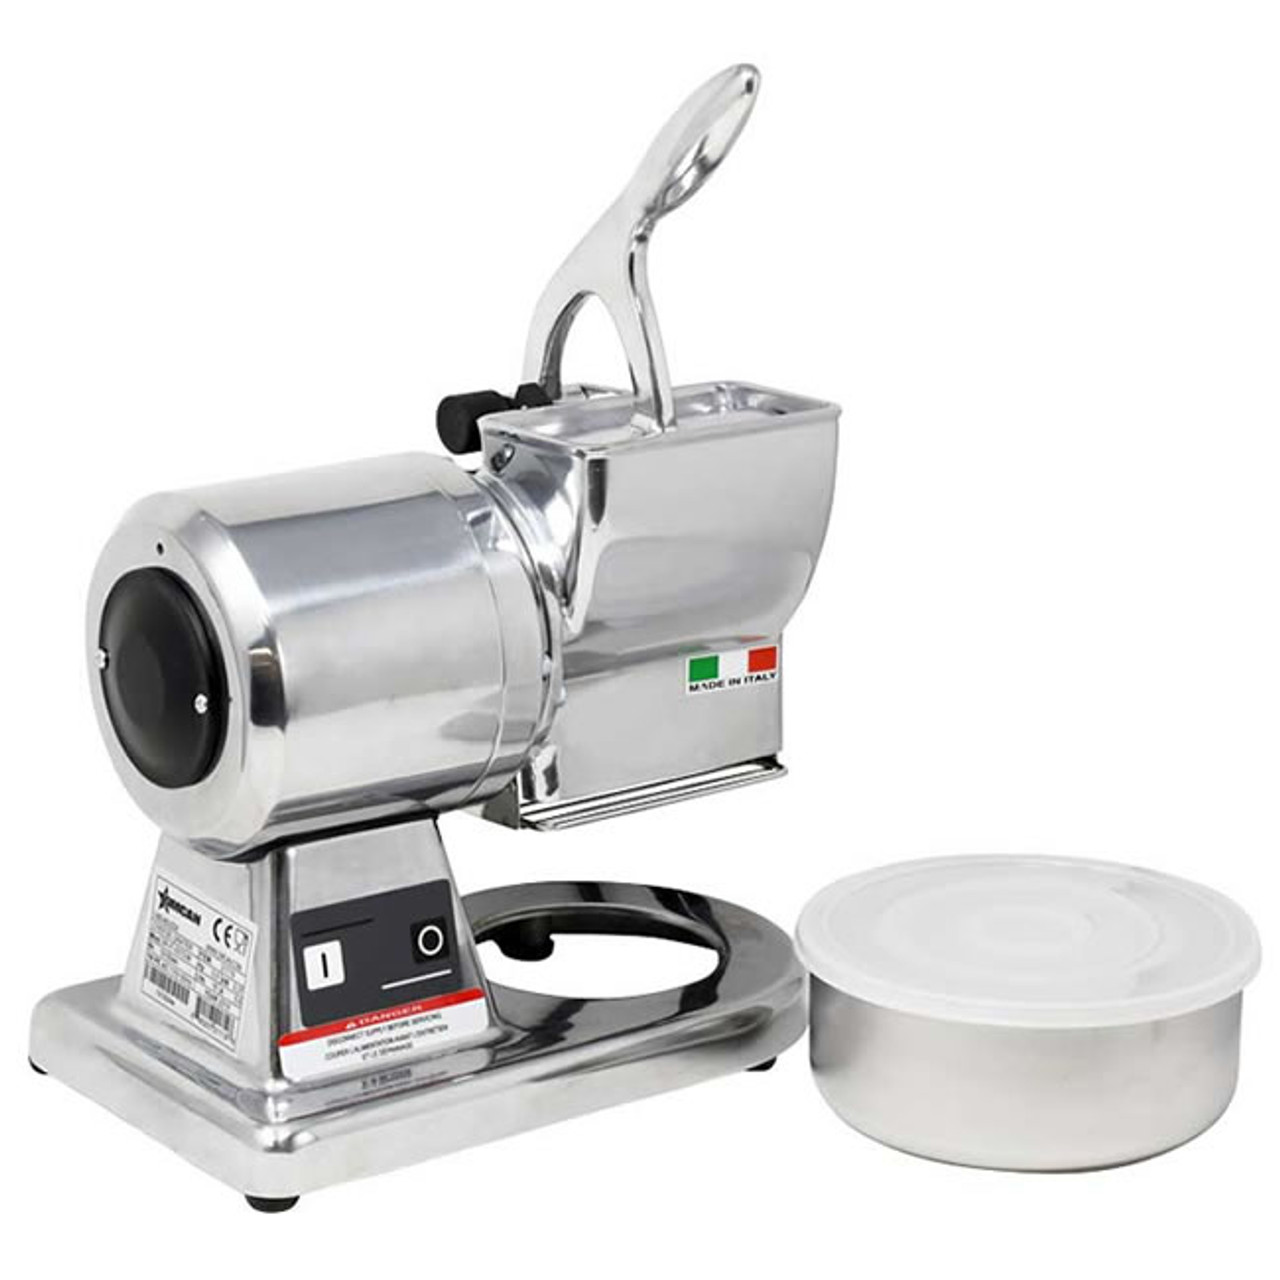 110V/220V Electric Cheese Grinder Automatic Cheese Milling Mchine